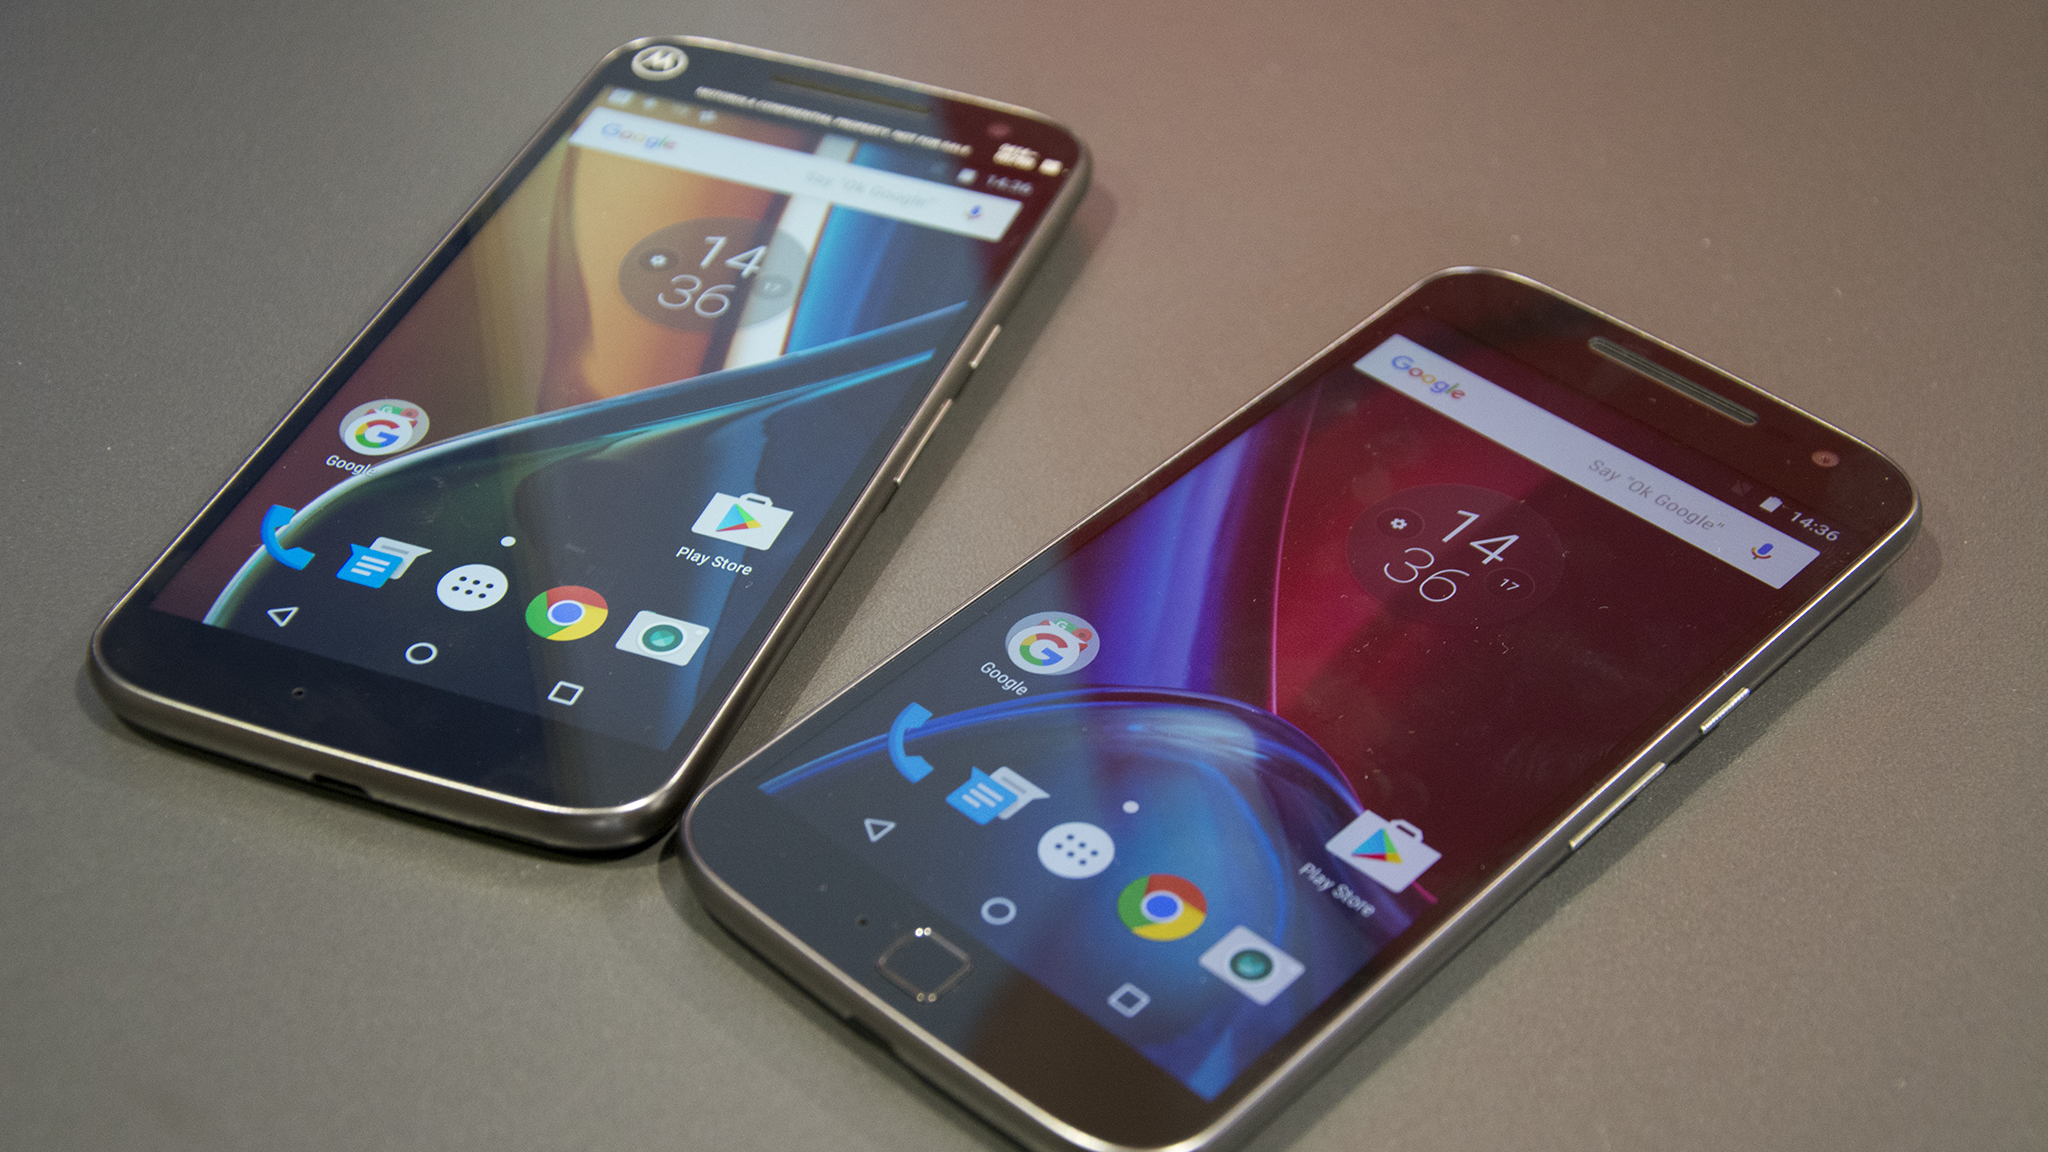 Motorola G4 and G4 Plus review Don't it the Moto G (4th